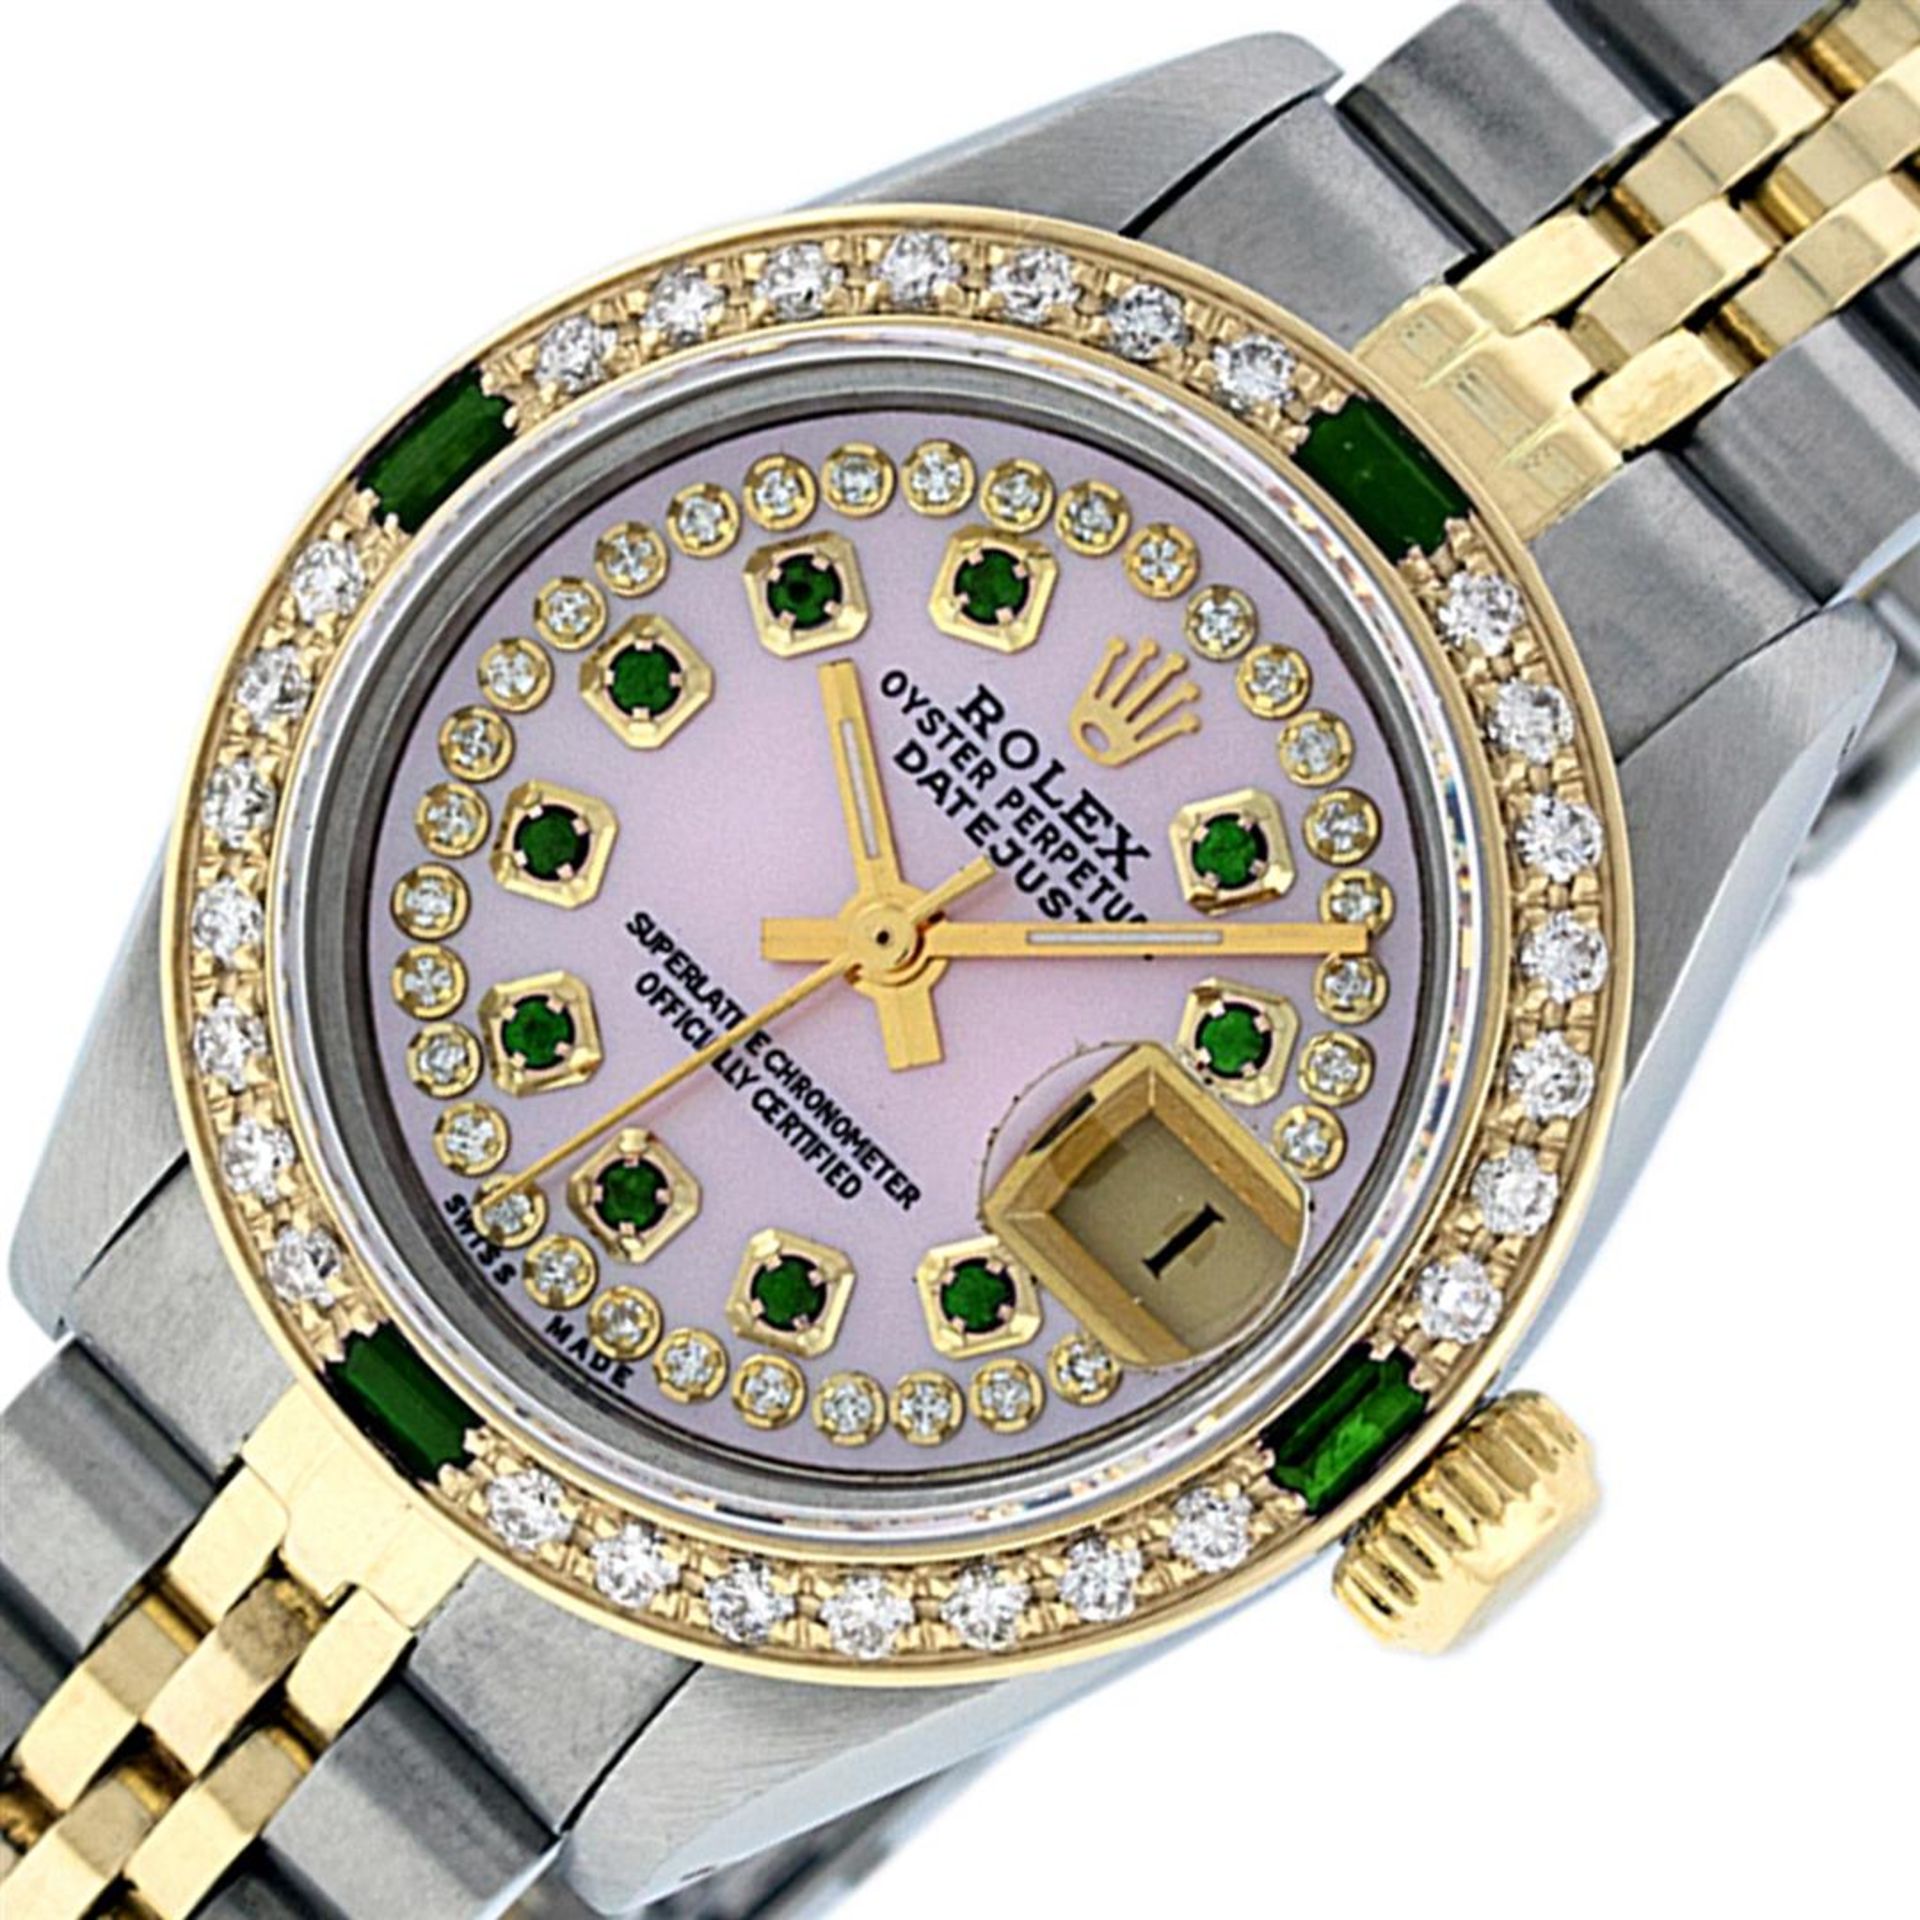 Rolex Ladies 2 Tone MOP Diamond & Emerald Oyster Perpetual Datejust Wristwatch - Image 2 of 9